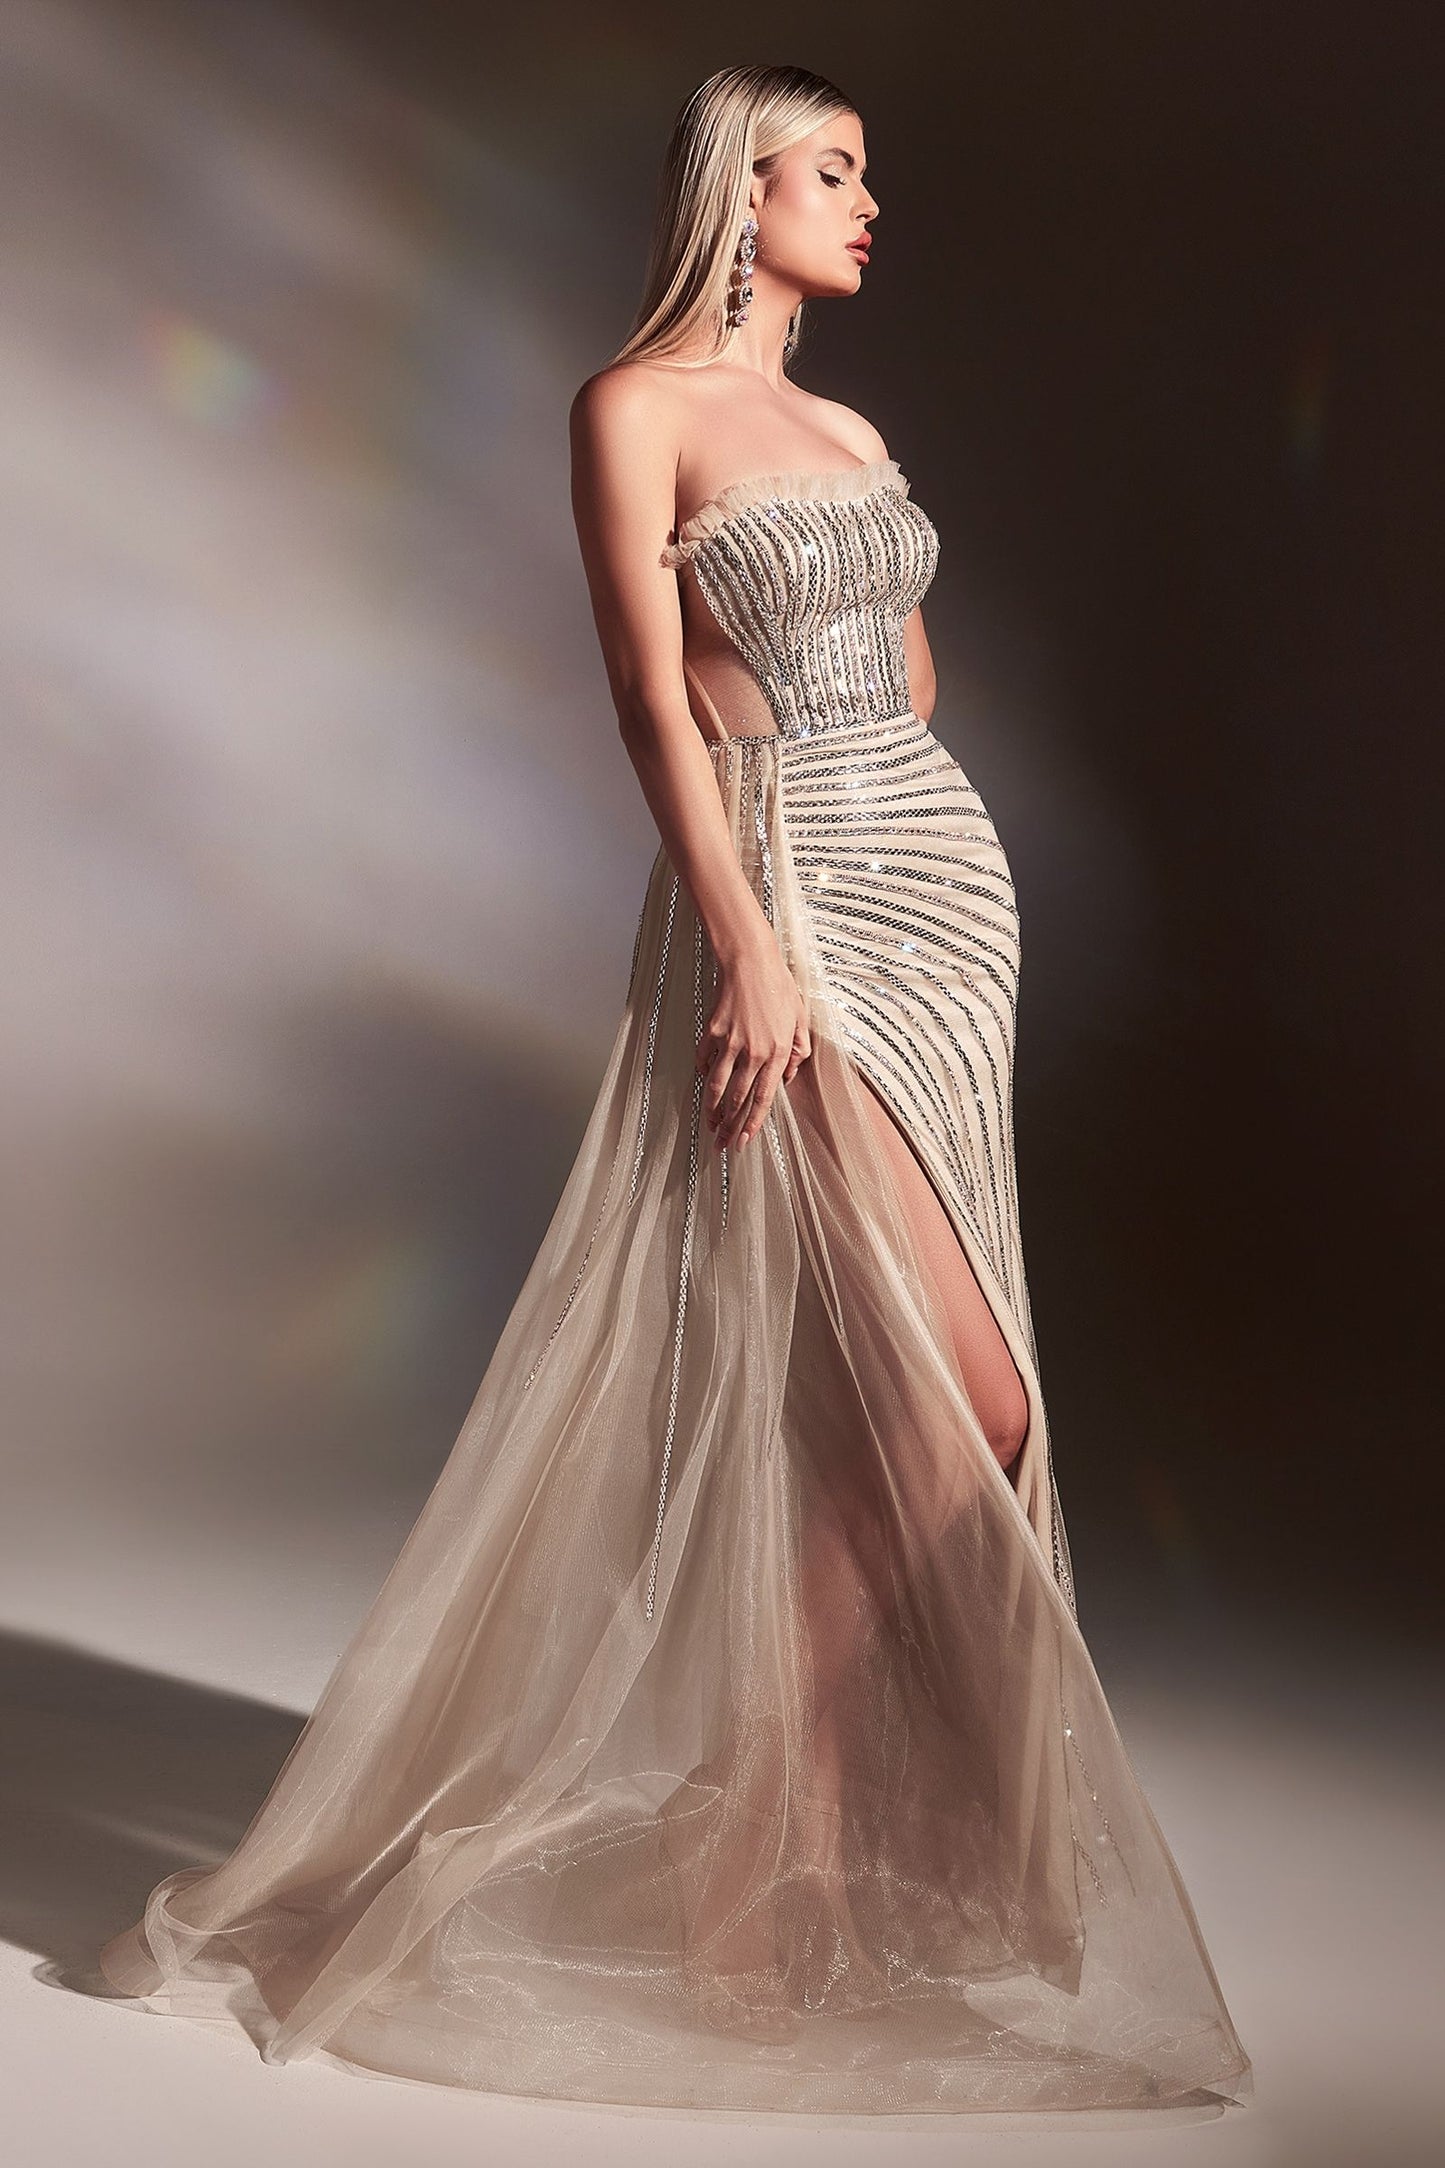 Fitted Nude Gown With Right Side Overskirt And Rhinestone Details